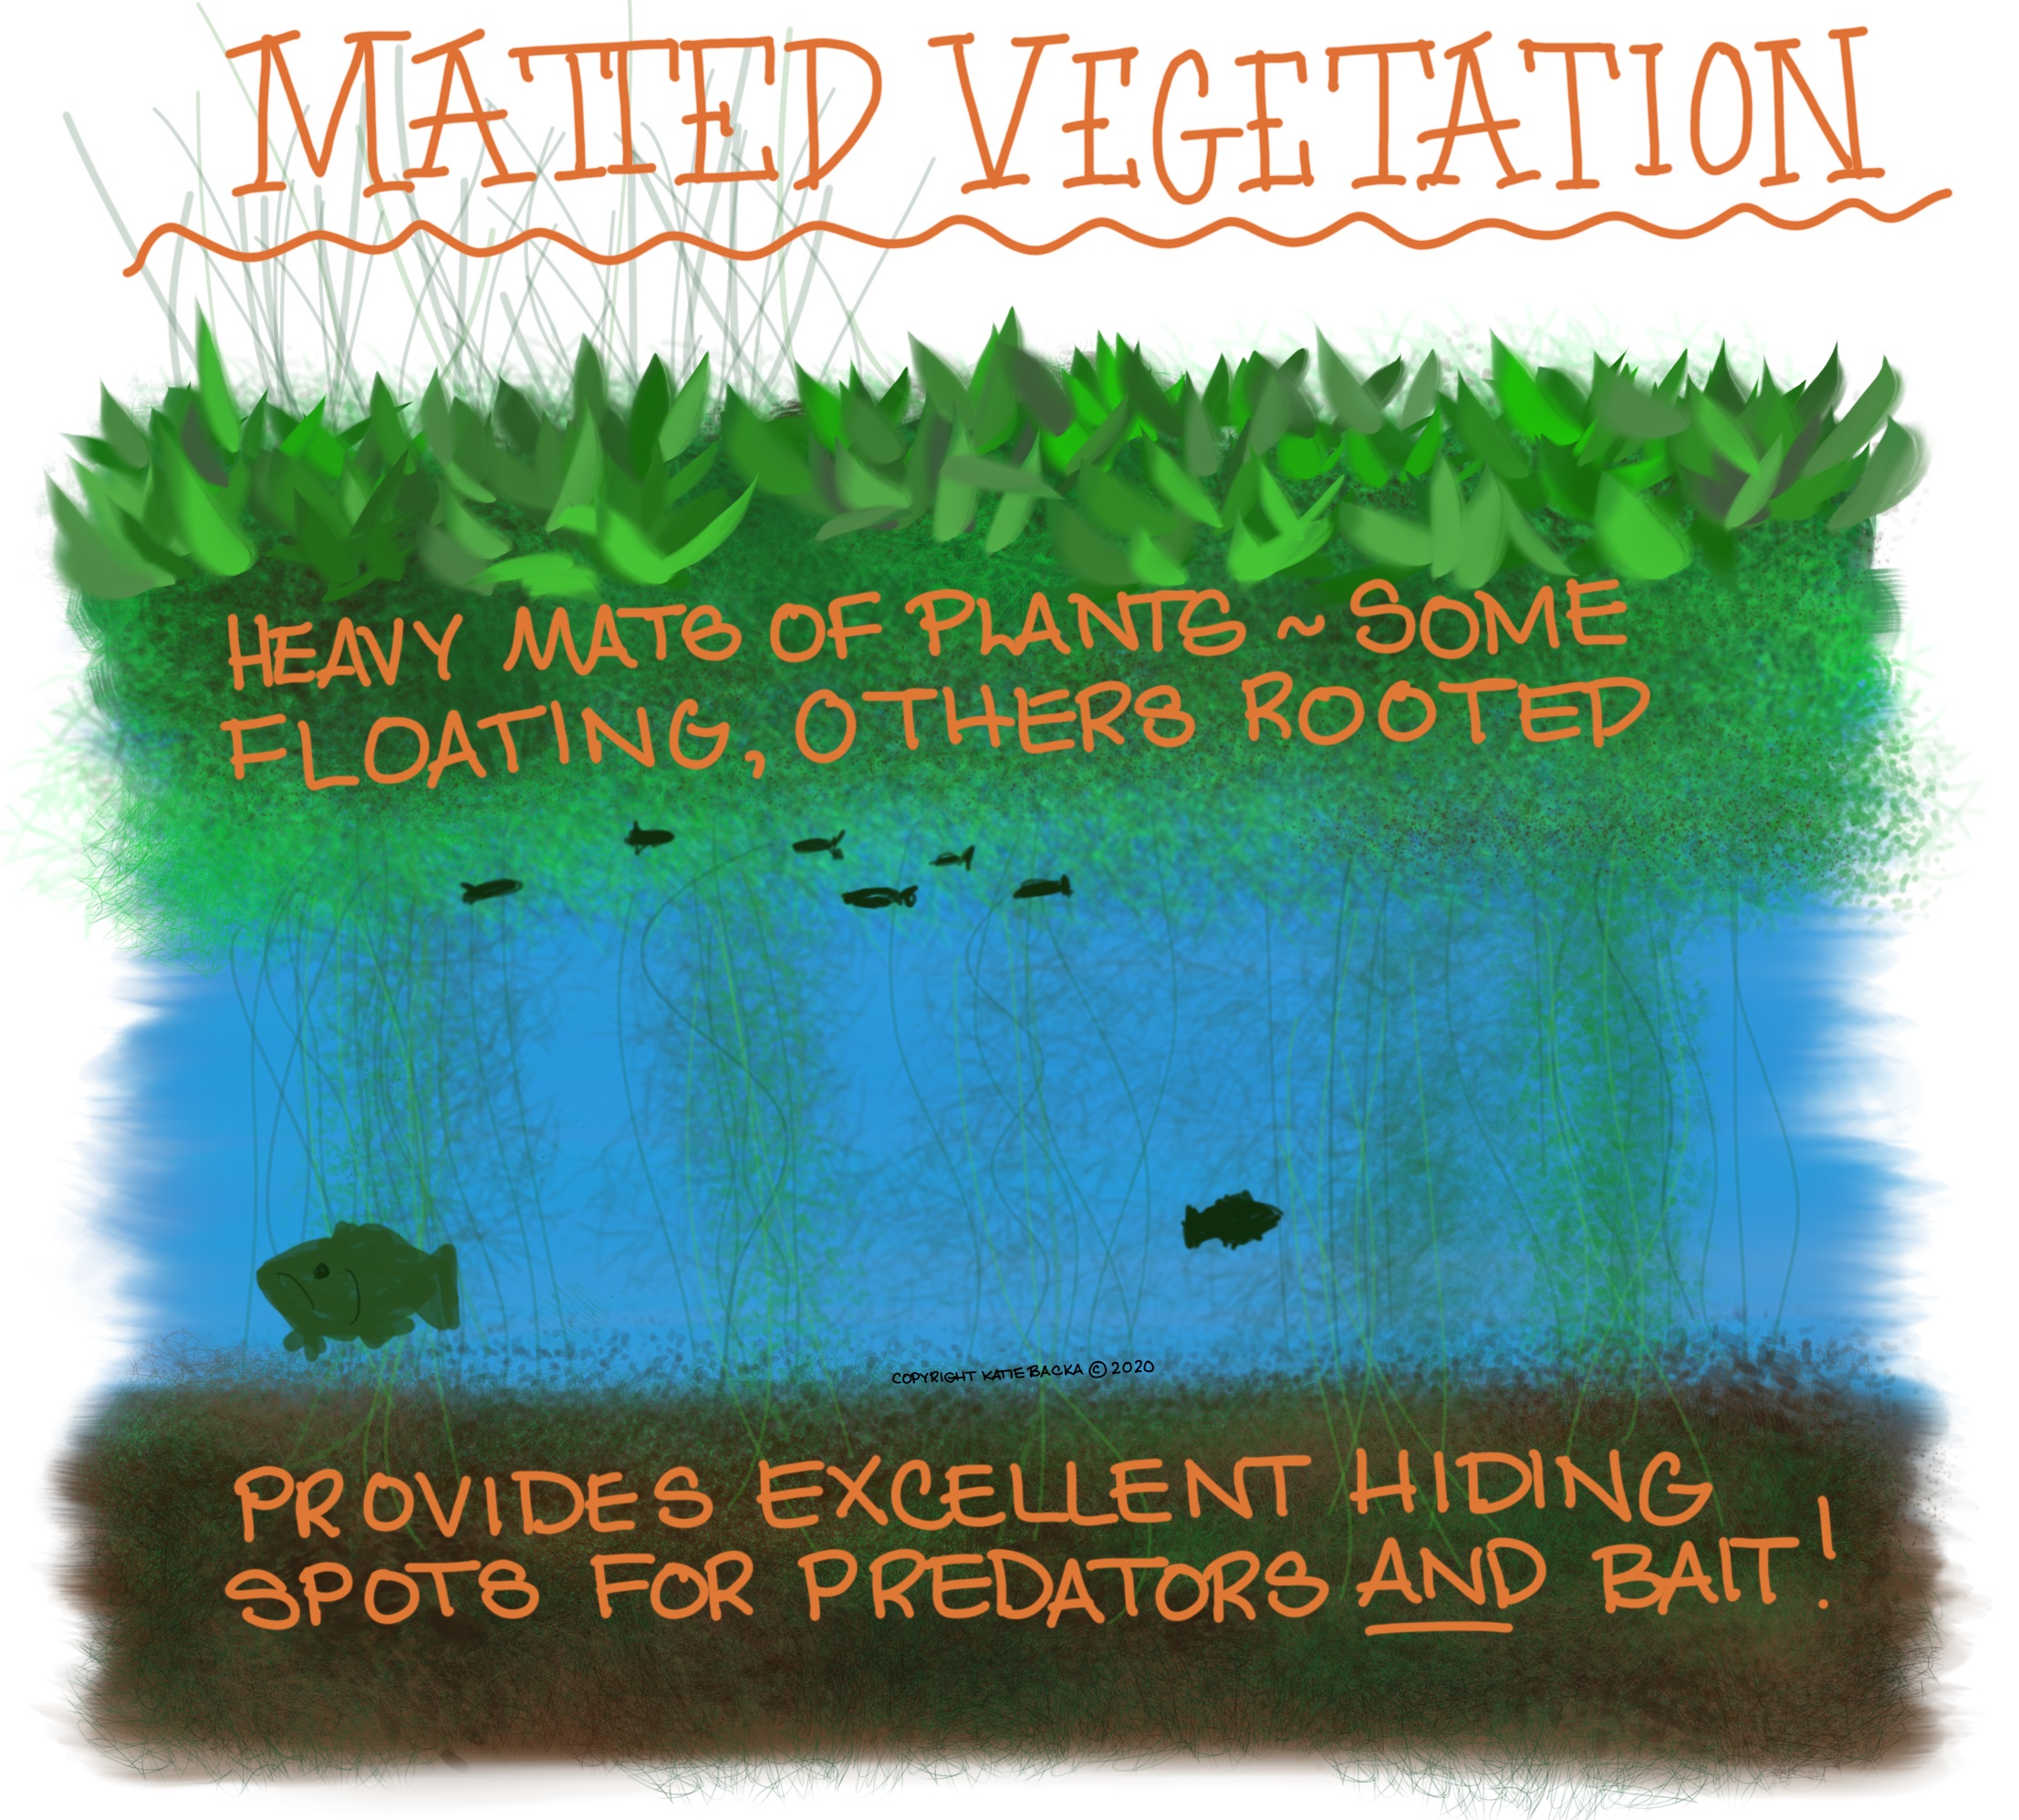 Script: Matted vegetation - Heavy mats of plants - some floating, others rooted - provides excellent hiding spots for predators and bait!